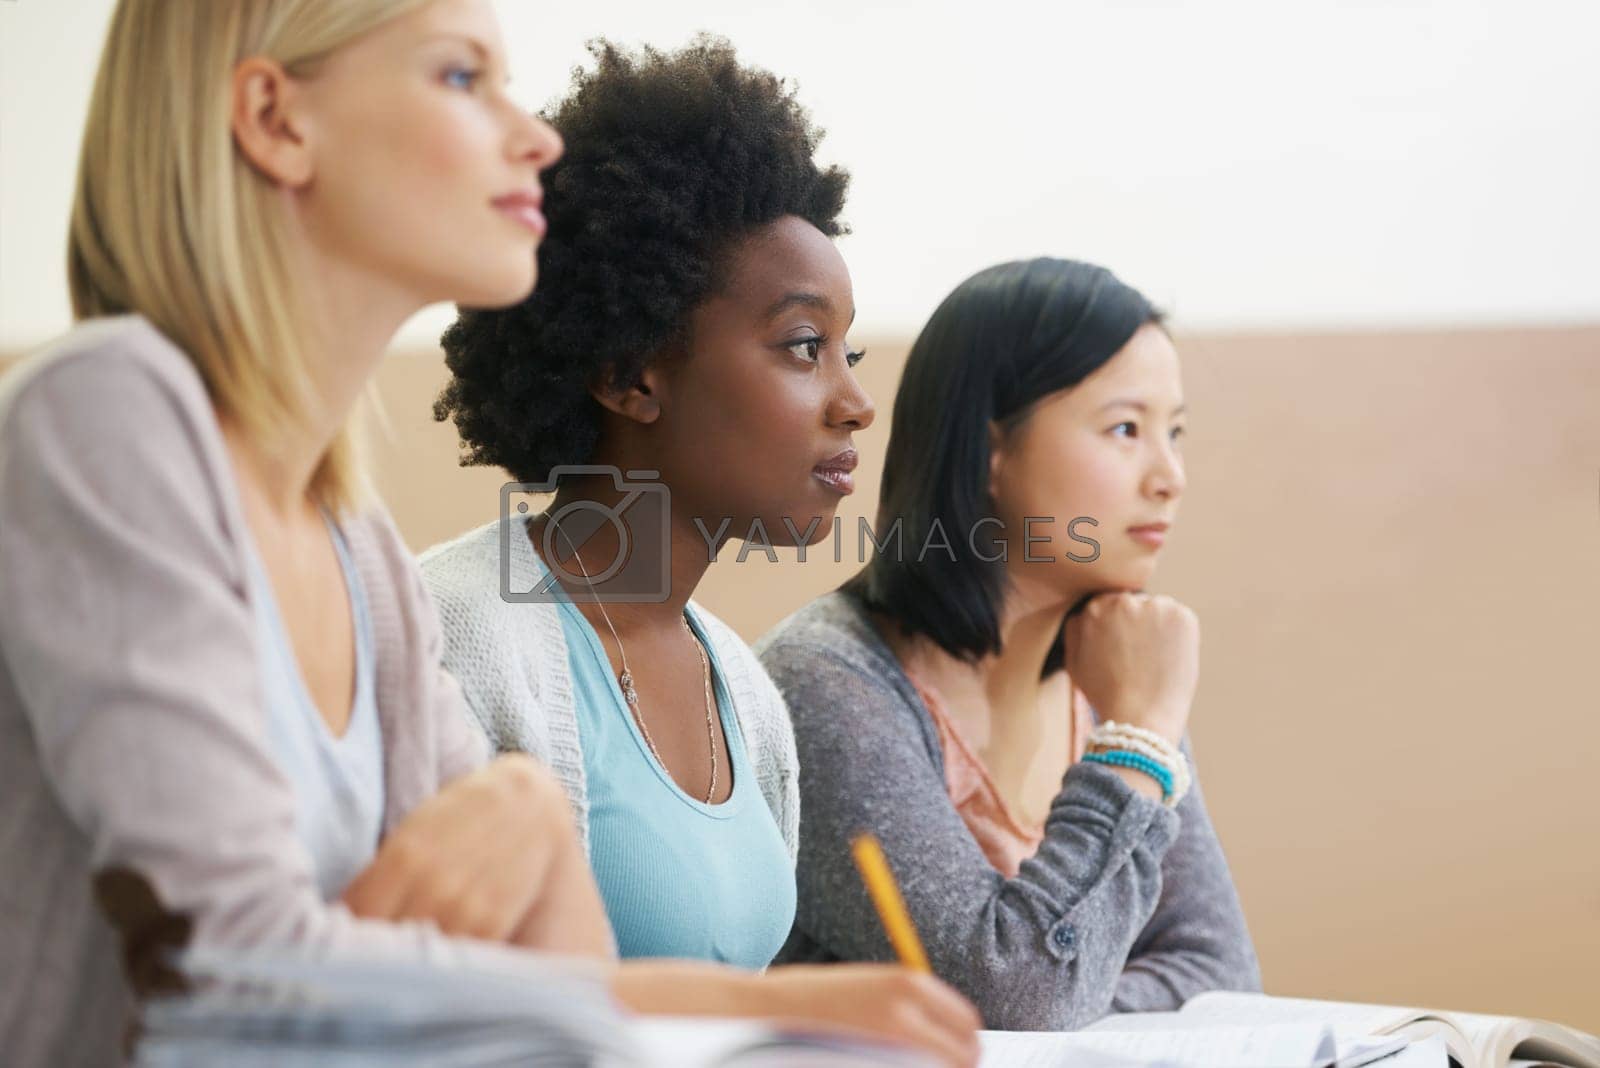 Royalty free image of Class is in session. female university students sitting in an exam room. by YuriArcurs